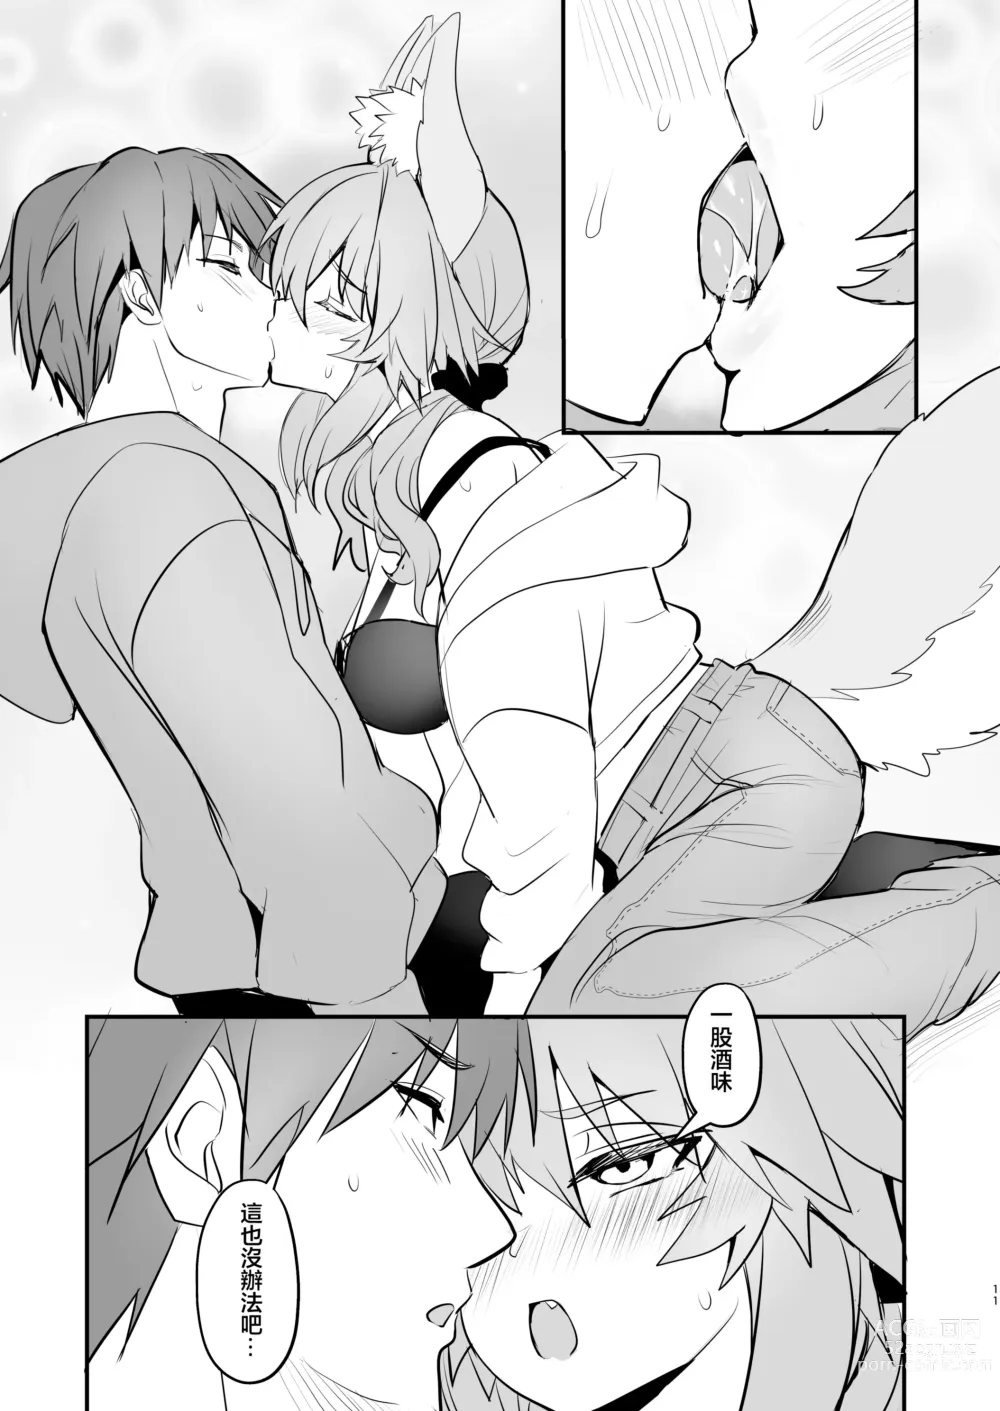 Page 10 of doujinshi 玉藻前大學物語